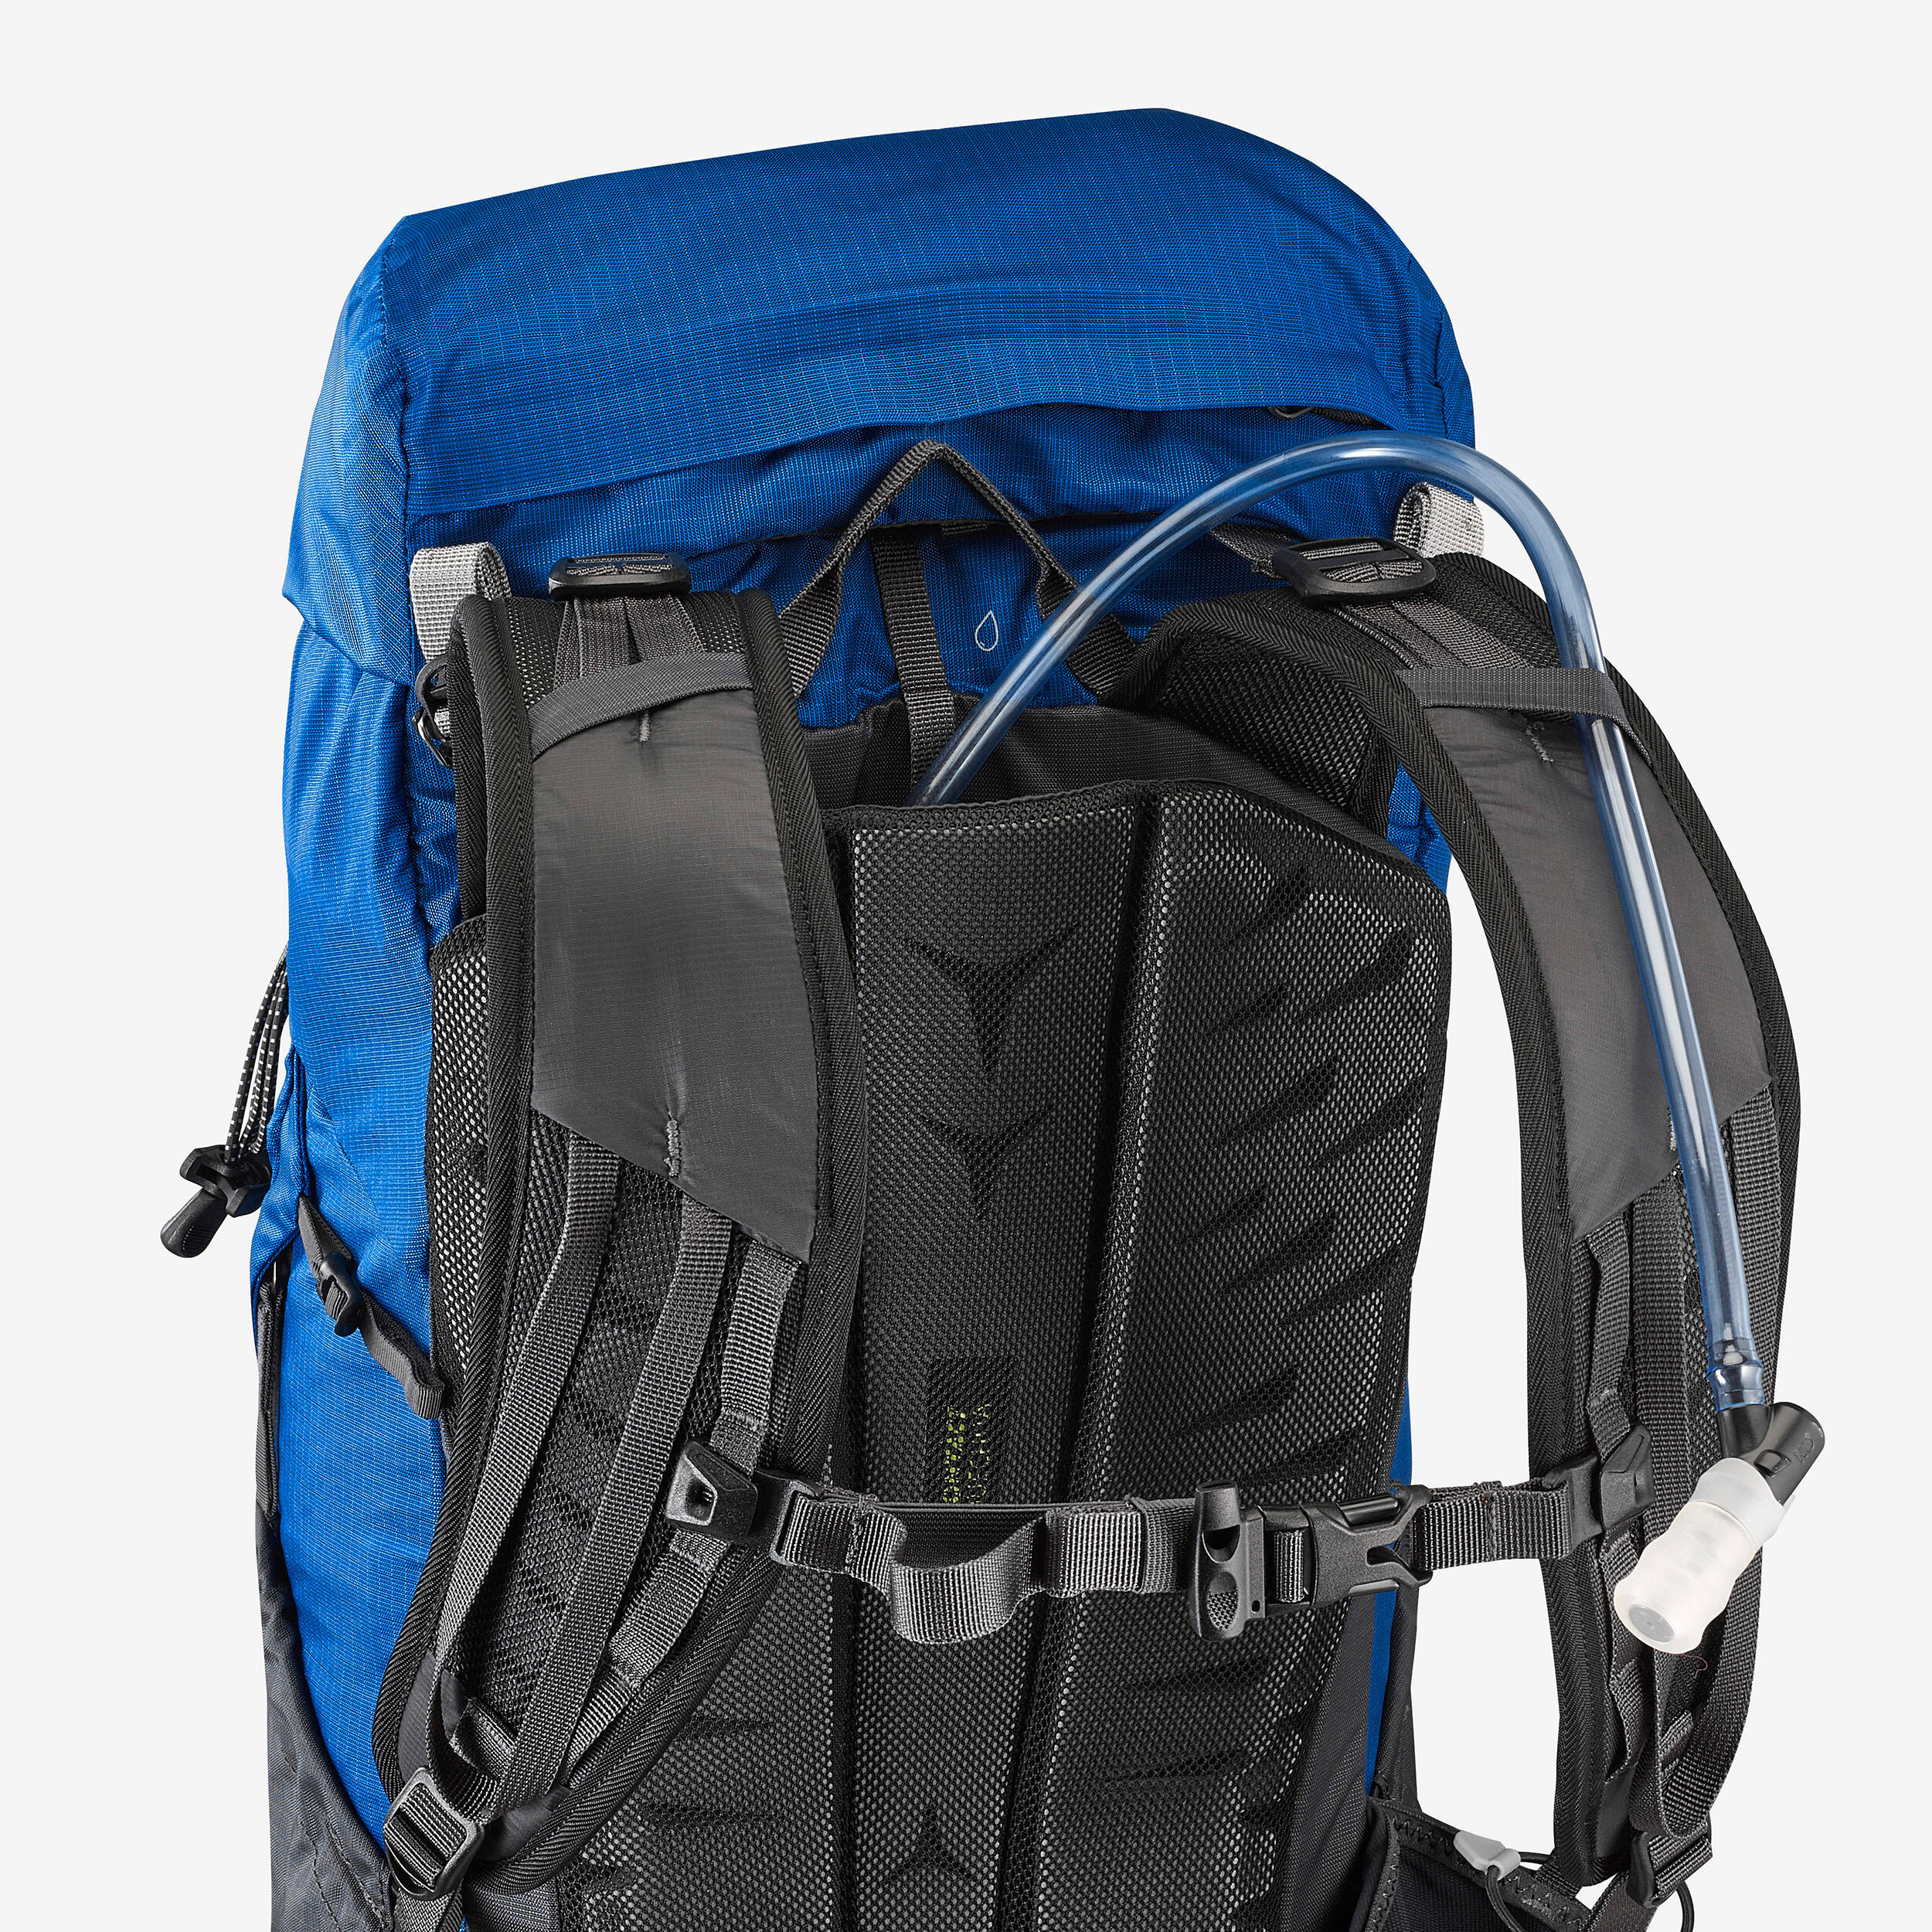 Mountain hiking backpack 25L - MH900 10/18